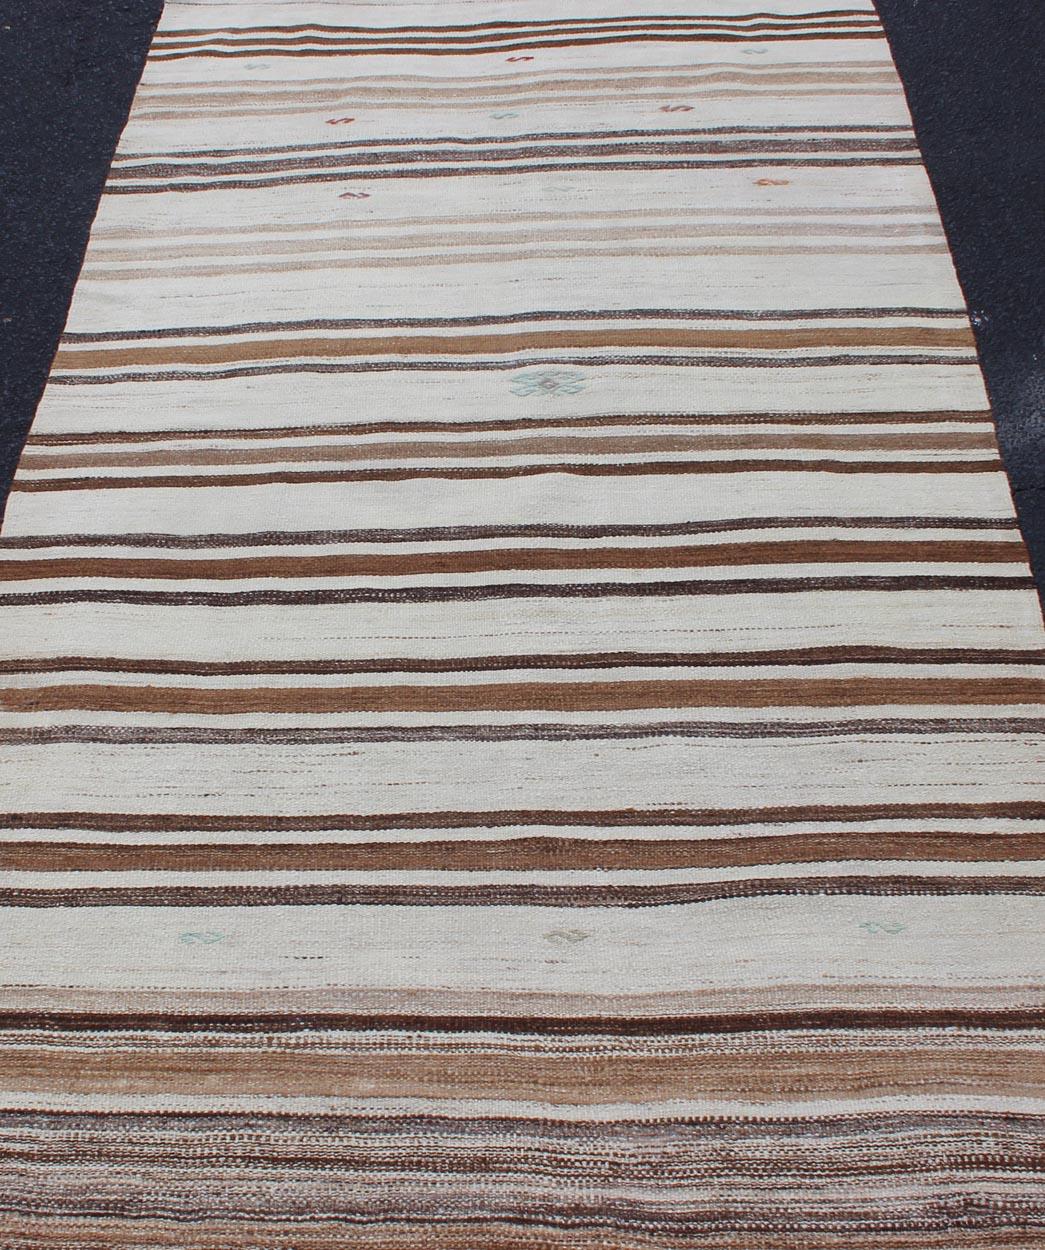 Striped Turkish Vintage Kilim Flat-Weave Rug in Shades of Browns Taupe and Ivory For Sale 5